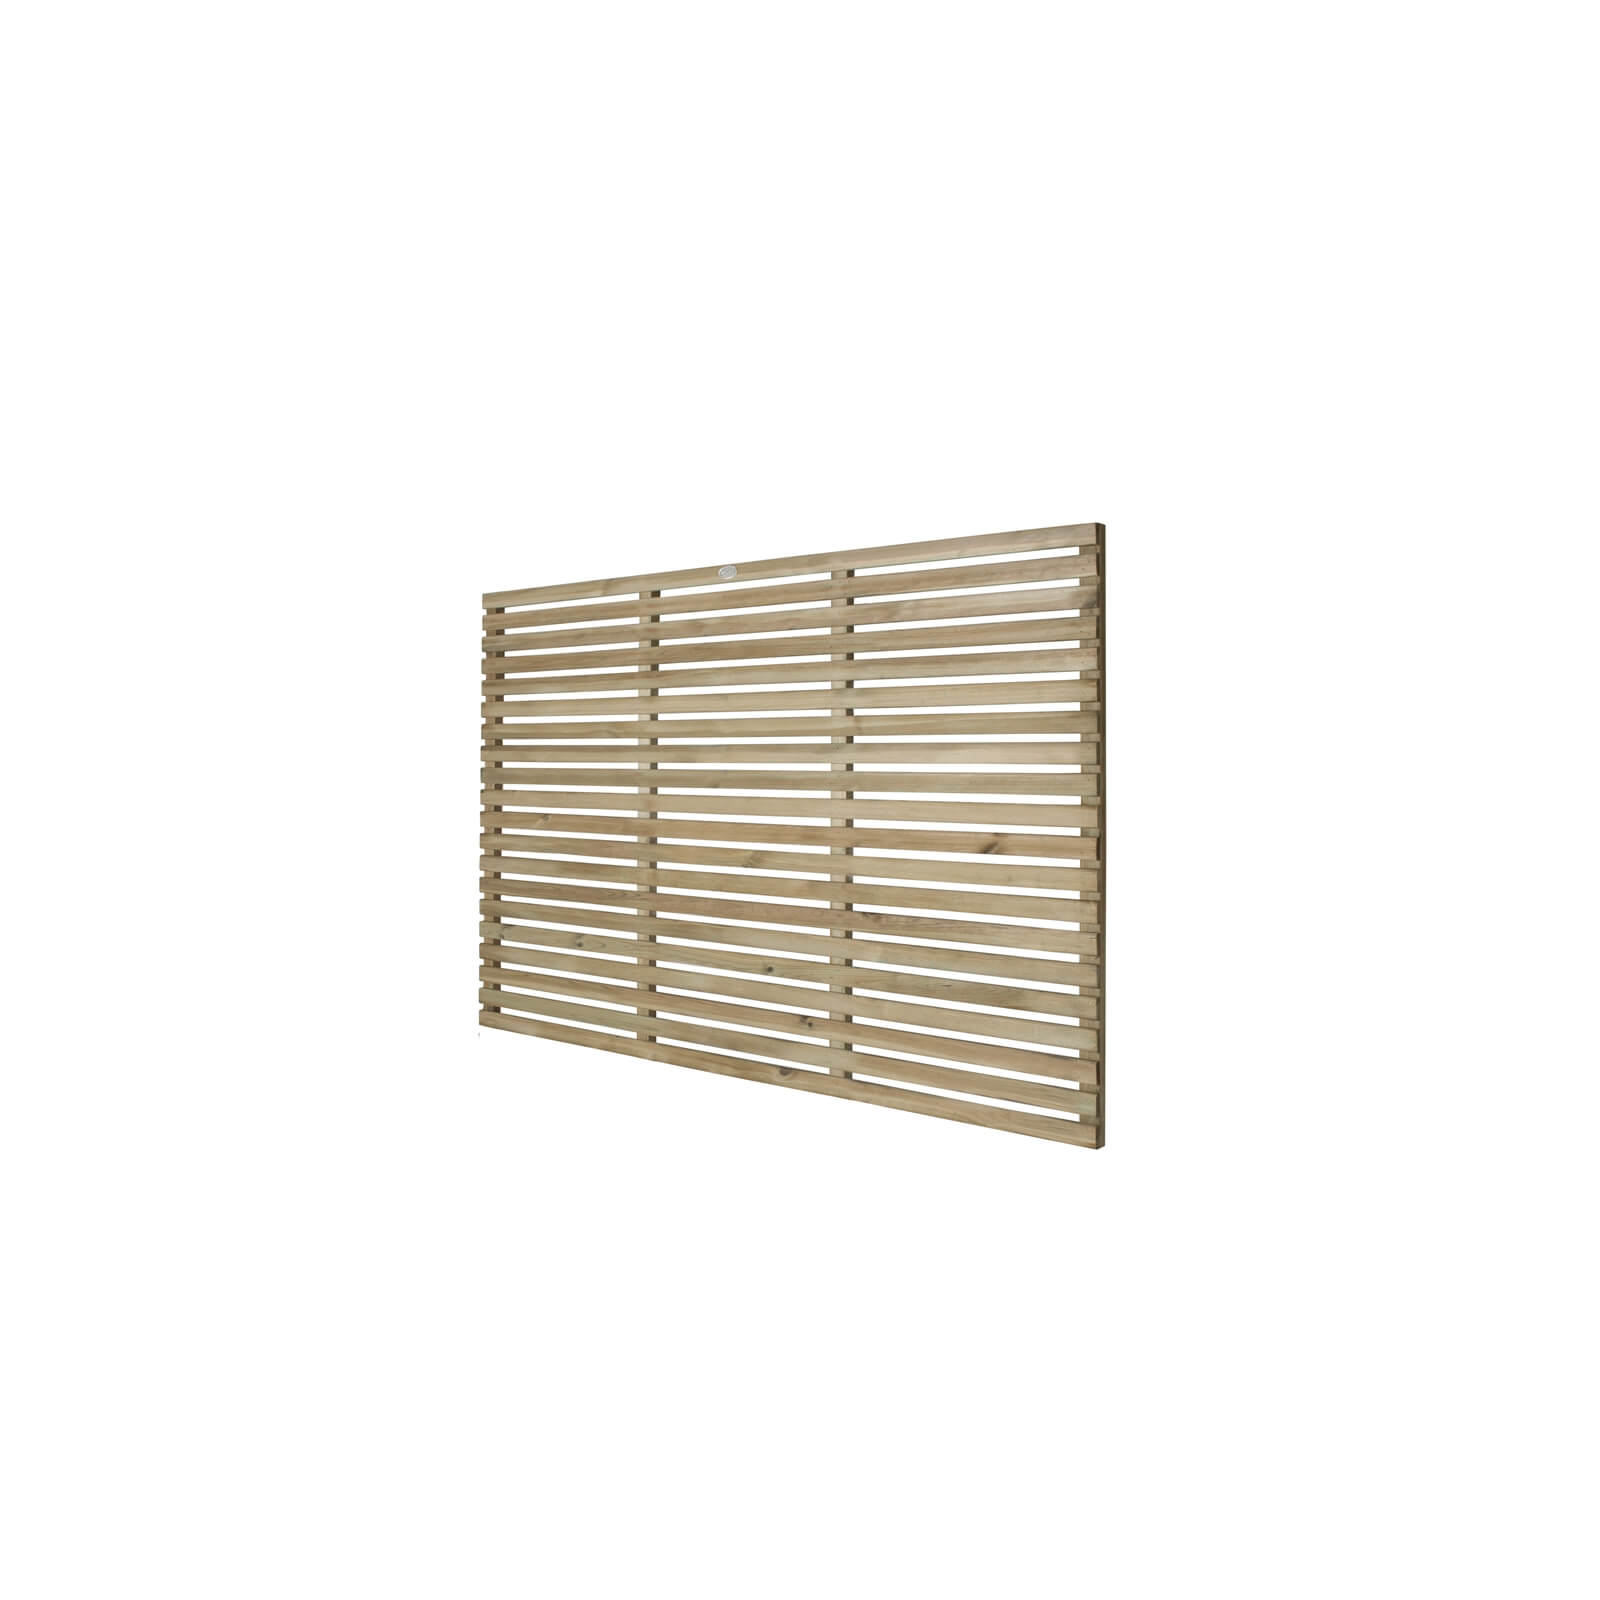 6ft x 4ft (1.8m x 1.2m) Pressure Treated Contemporary Slatted Fence Panel - Pack of 3